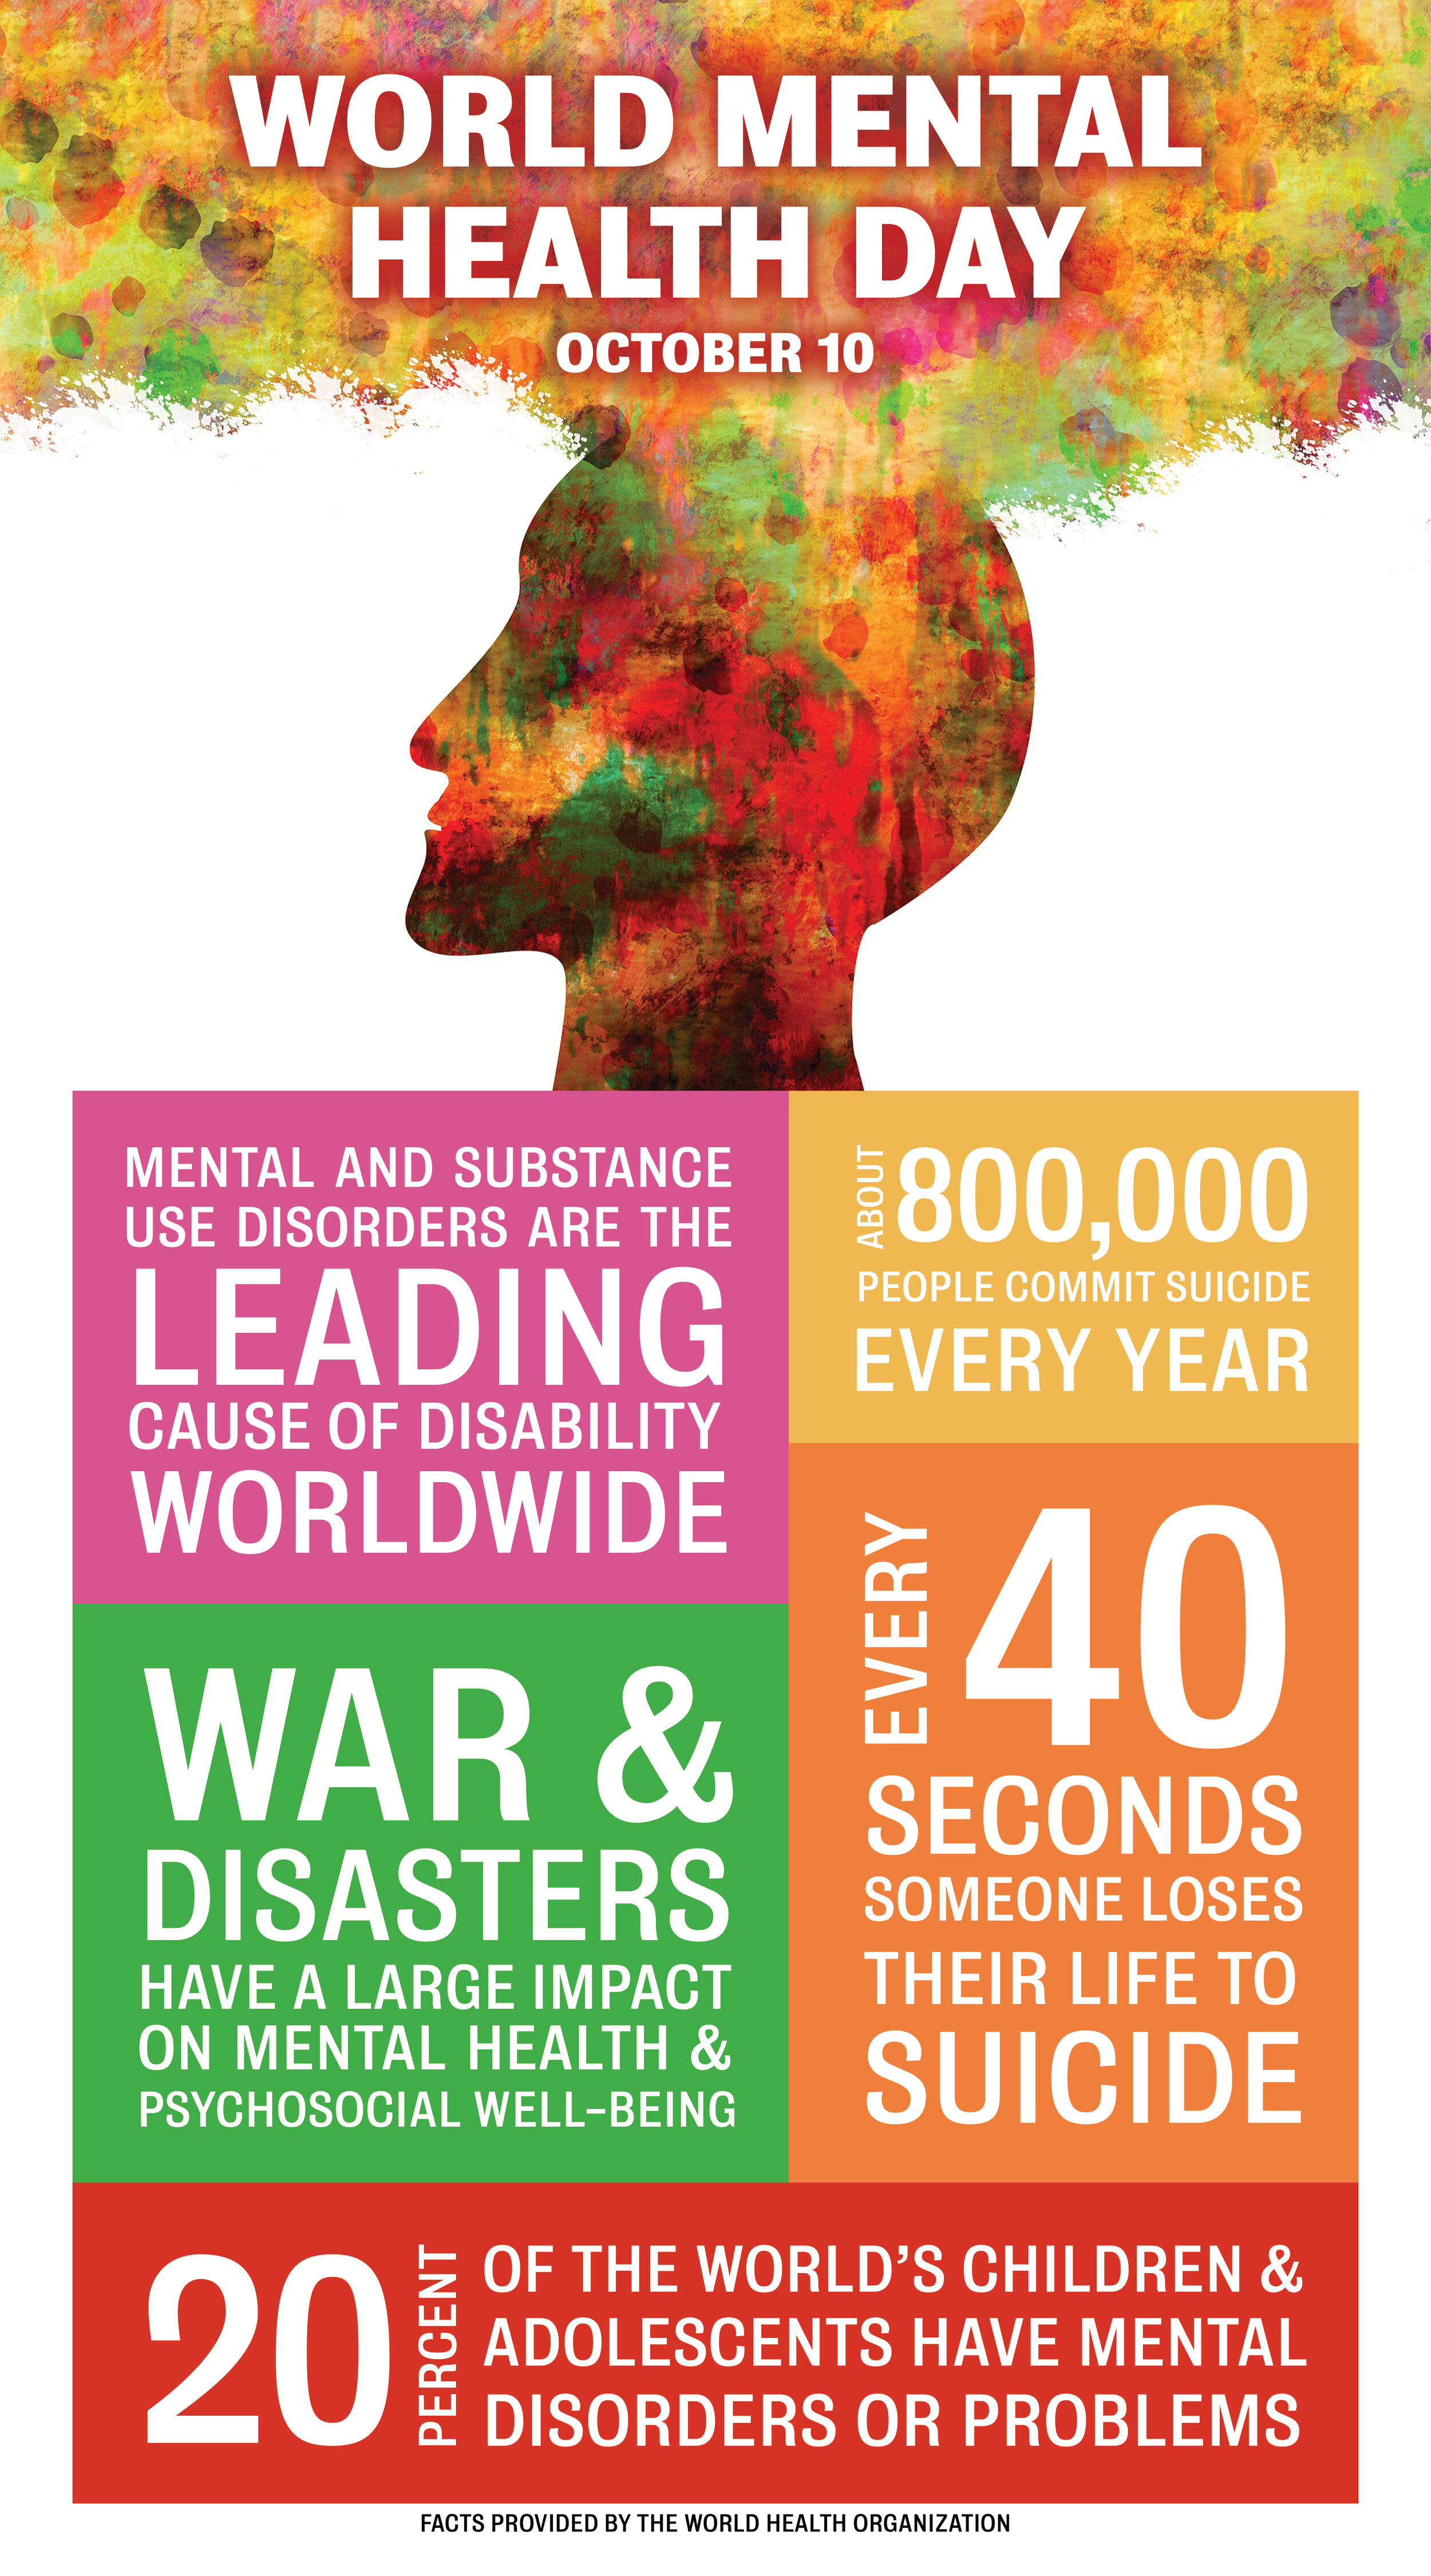 World Mental Health Day is Oct. 10, so here are a few facts about the day.